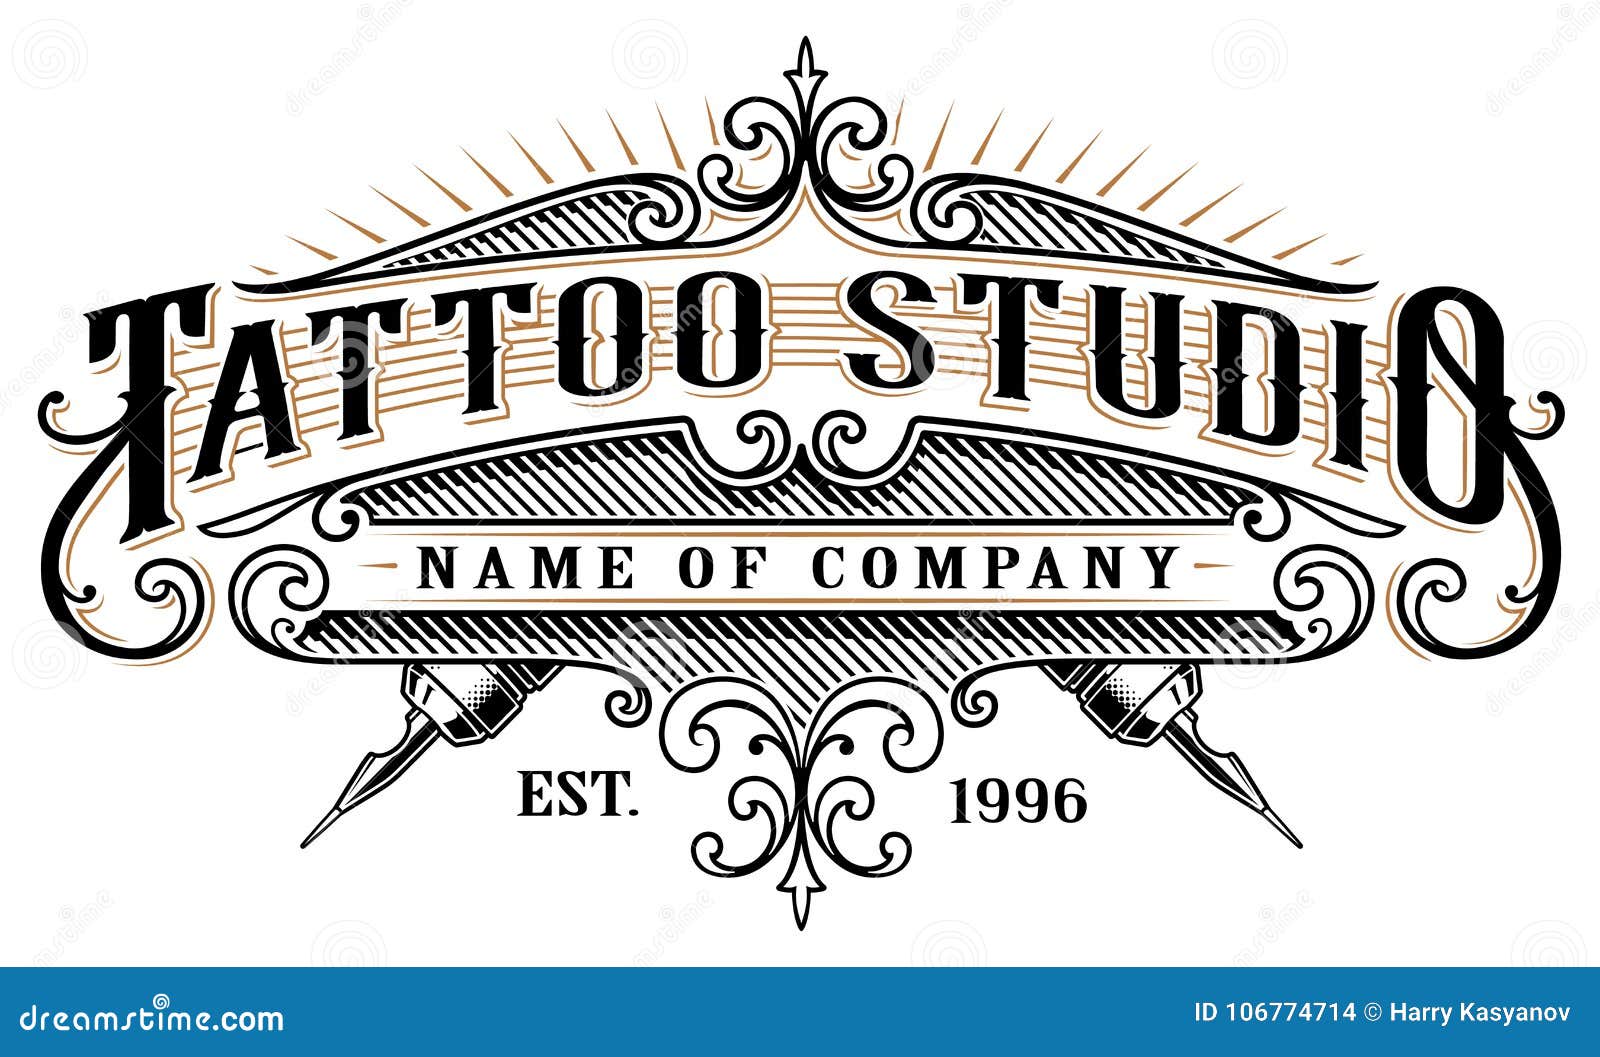 Vintage Tattoo Convention Colorful Poster Vector Illustration ...